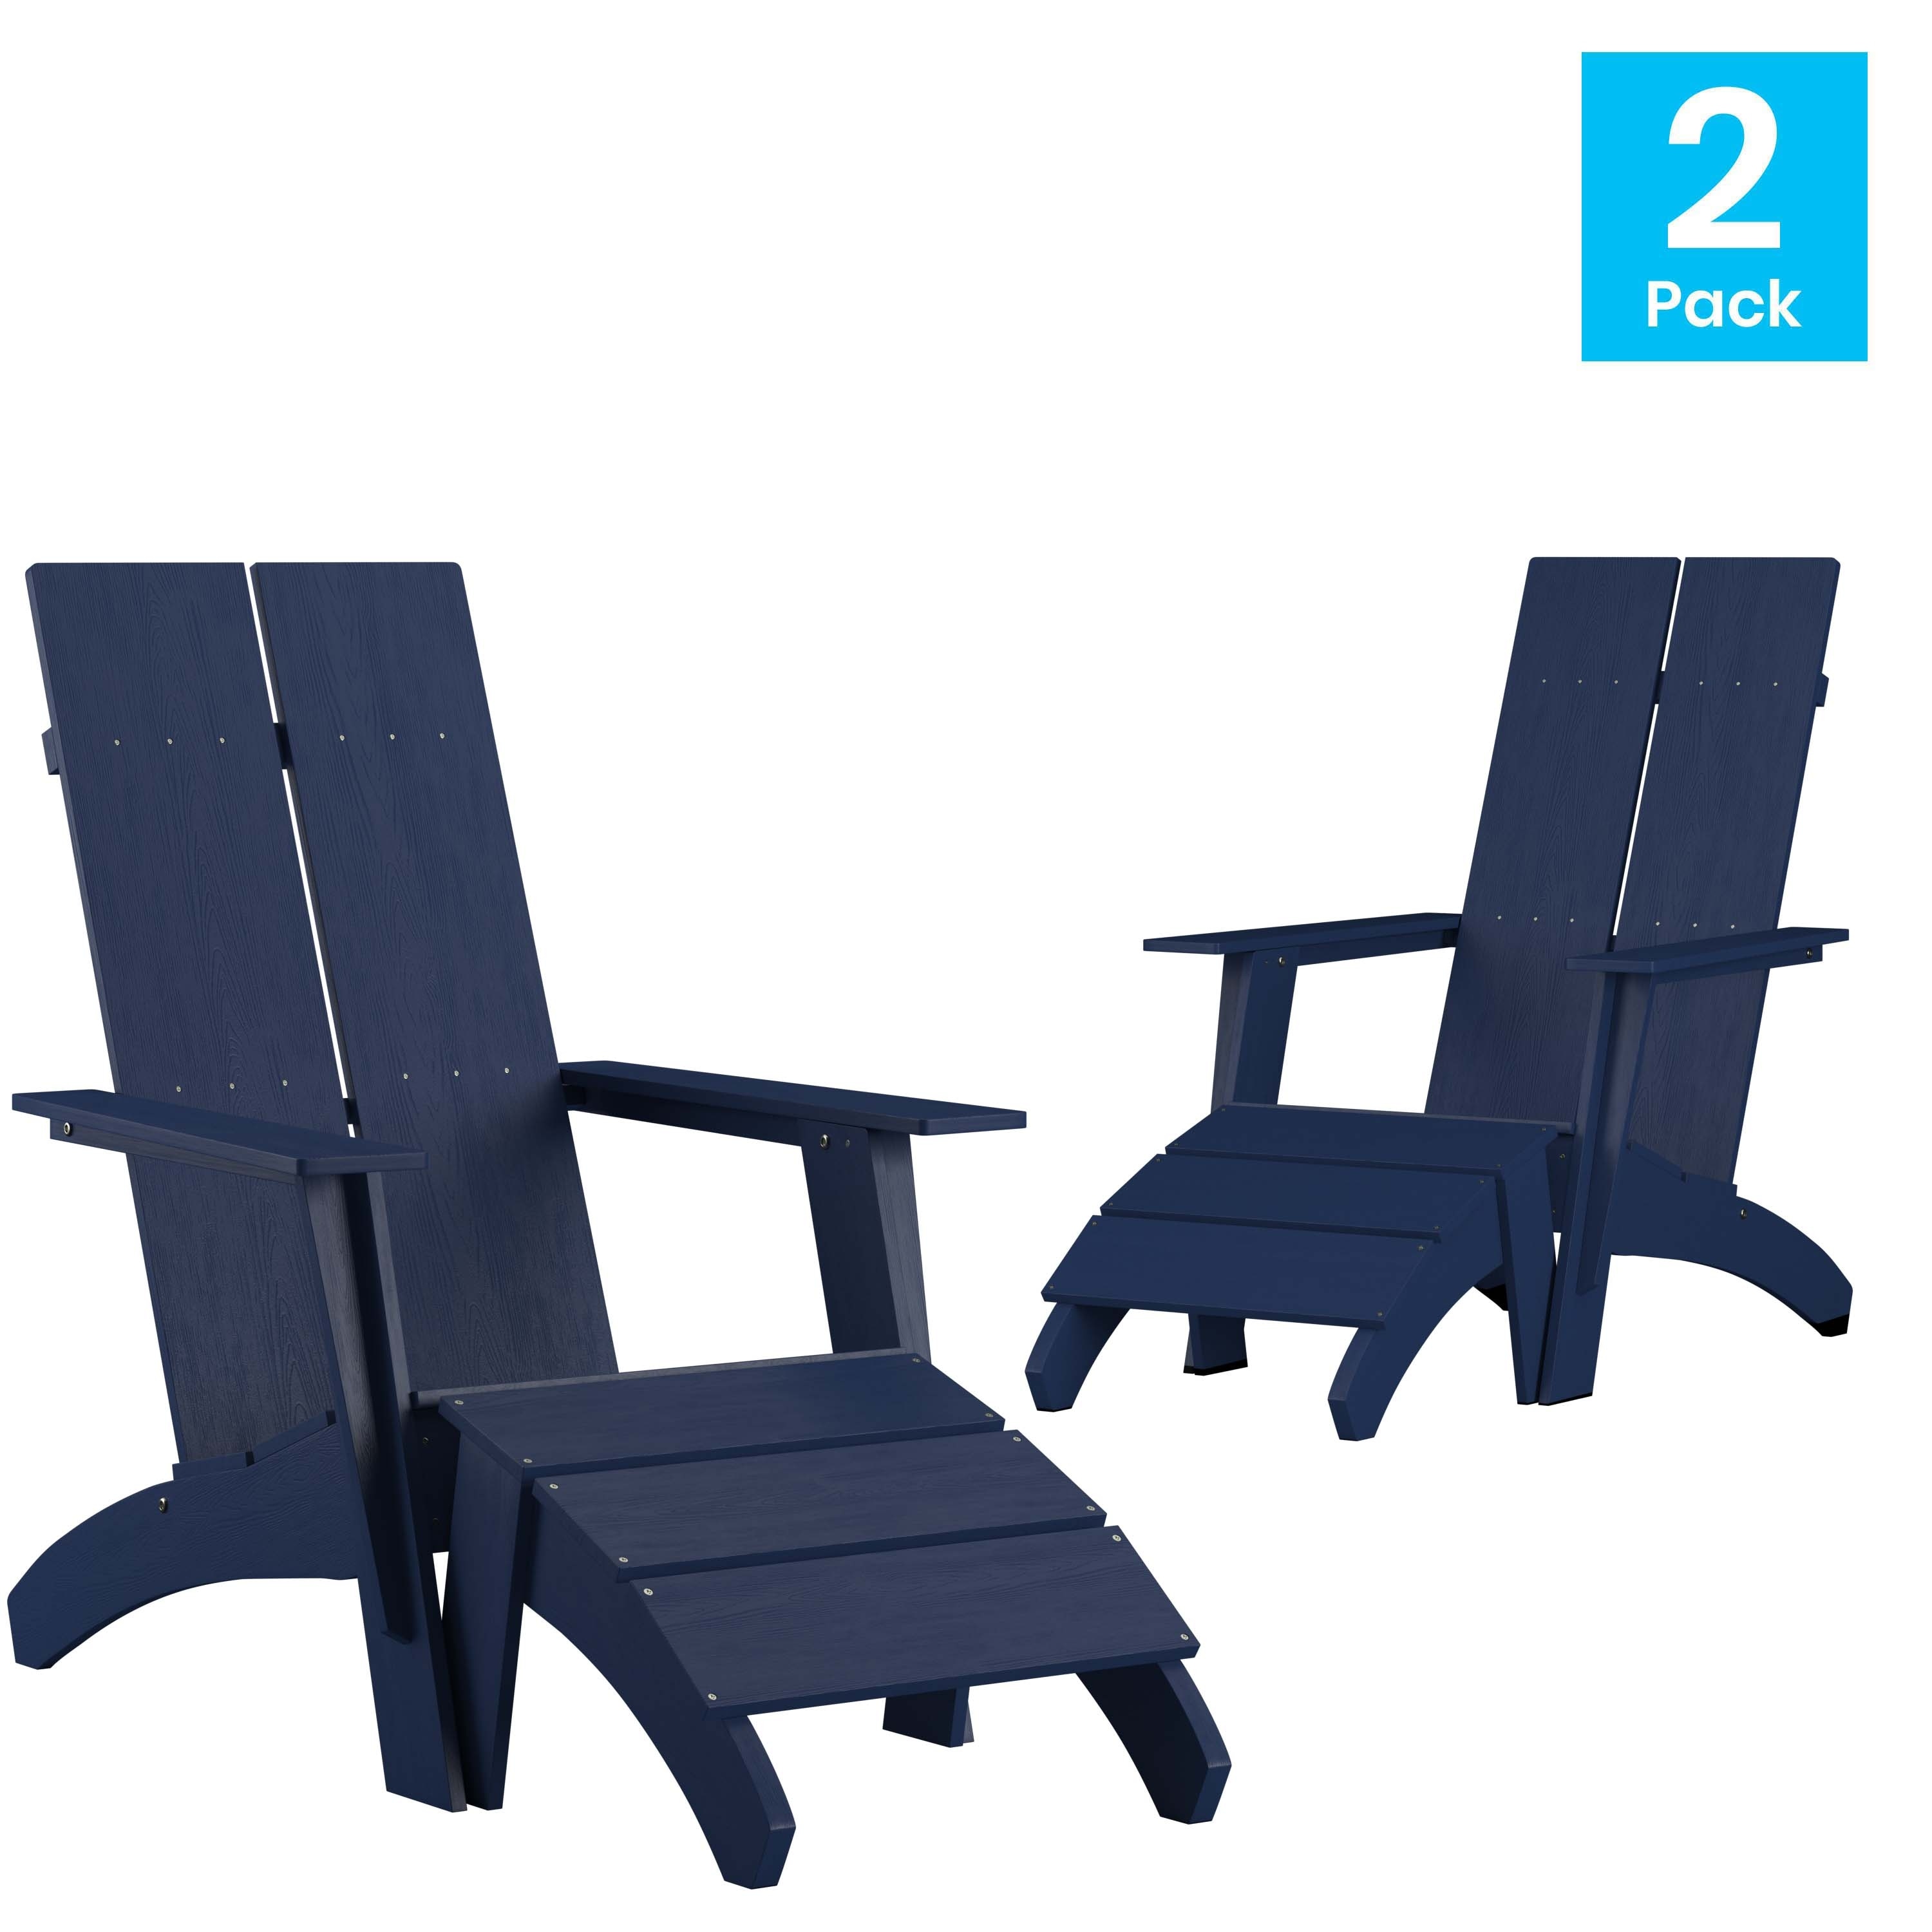 Flash Furniture Set of 2 Indoor/Outdoor 2-Slat Adirondack Style Chairs & Footrests in Gray Navy - image 5 of 5